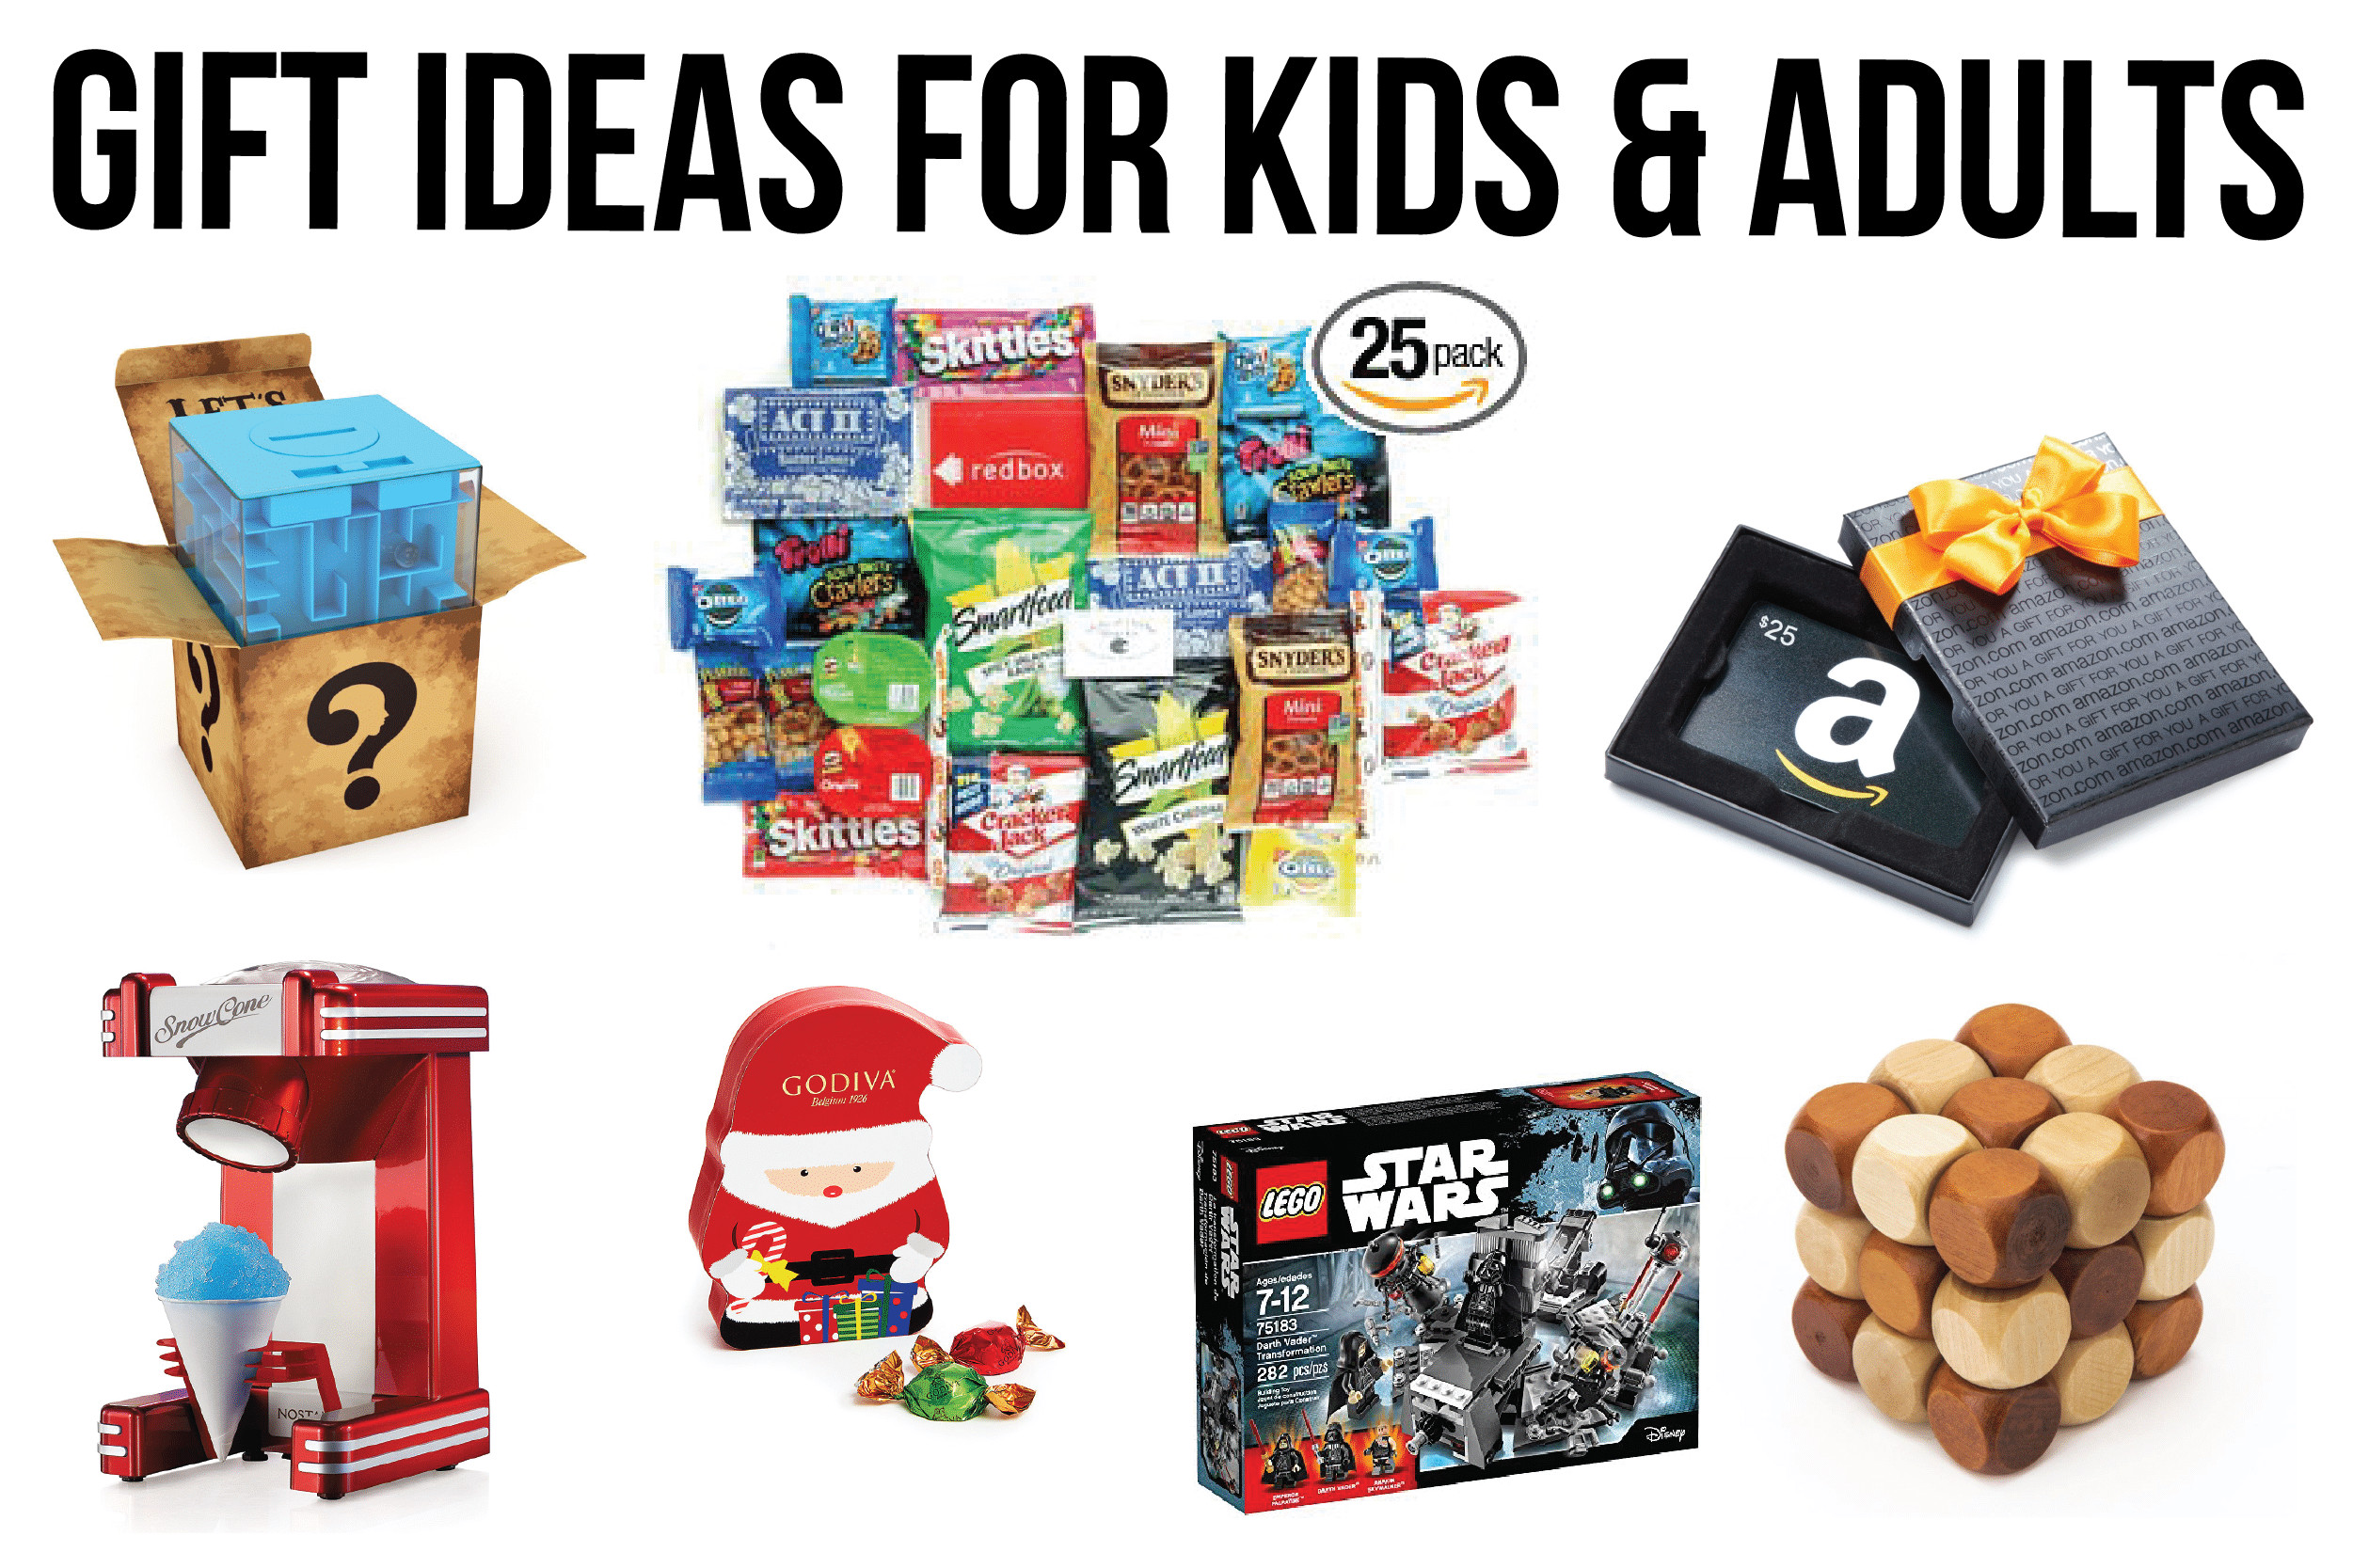 Christmas Gift Exchange Ideas For Kids
 100 of the Best White Elephant Gifts & Other Gift Ideas